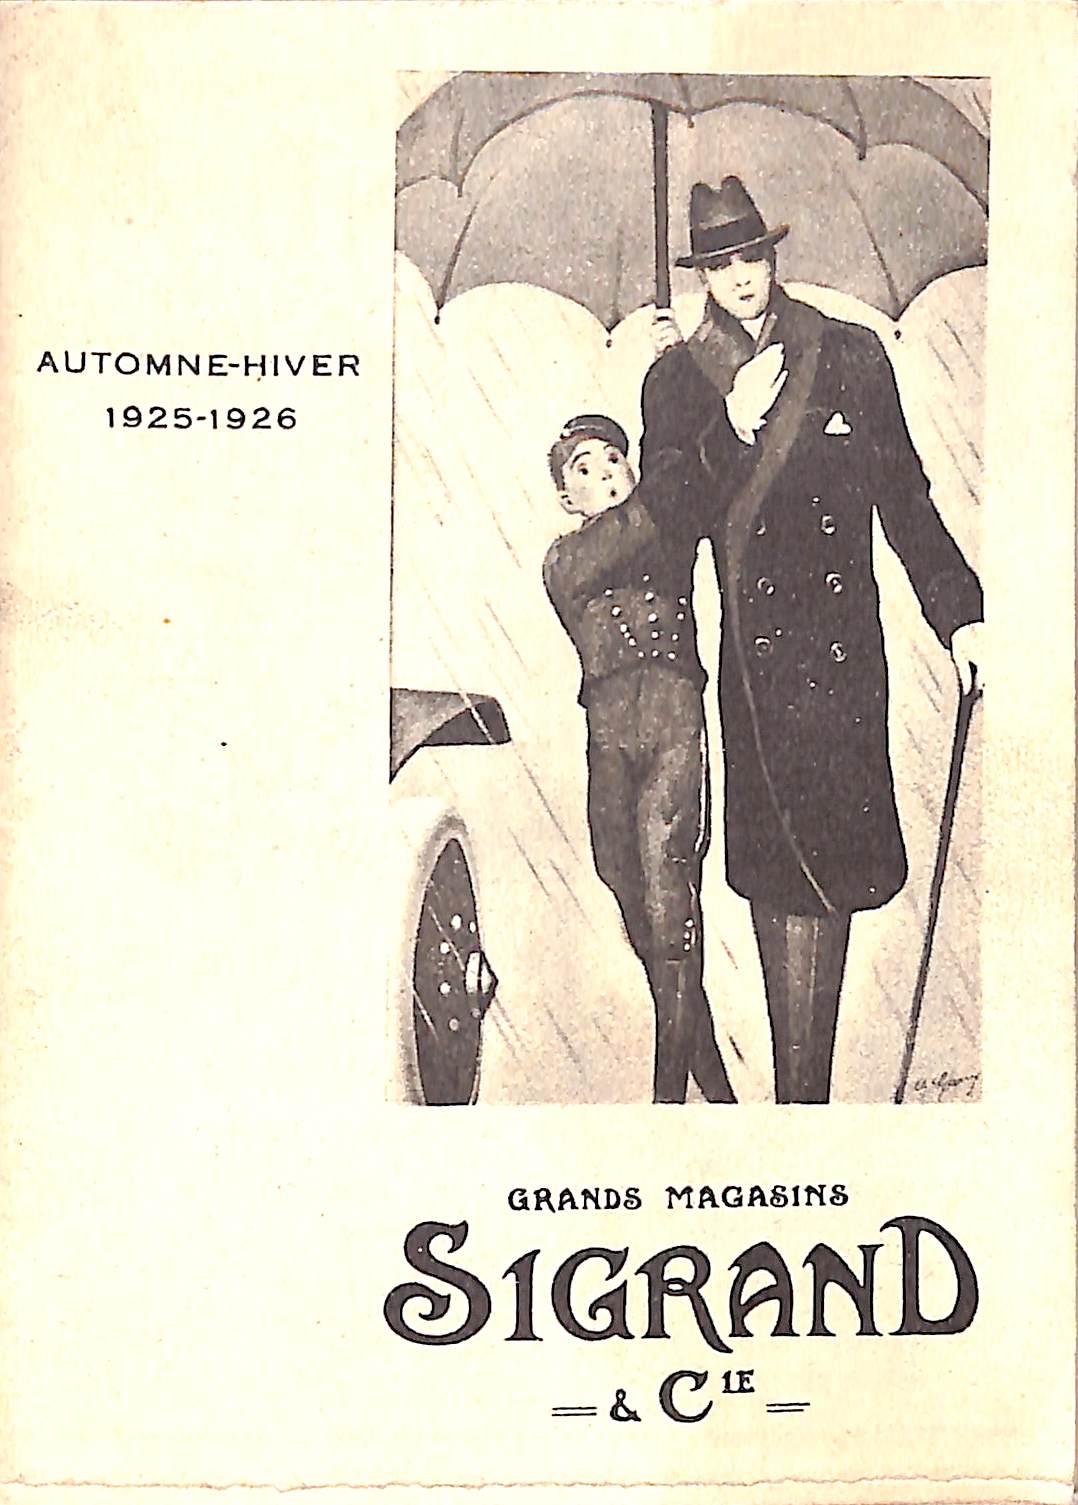 Sigrand & Cie Automne-Hiver 1925-1926